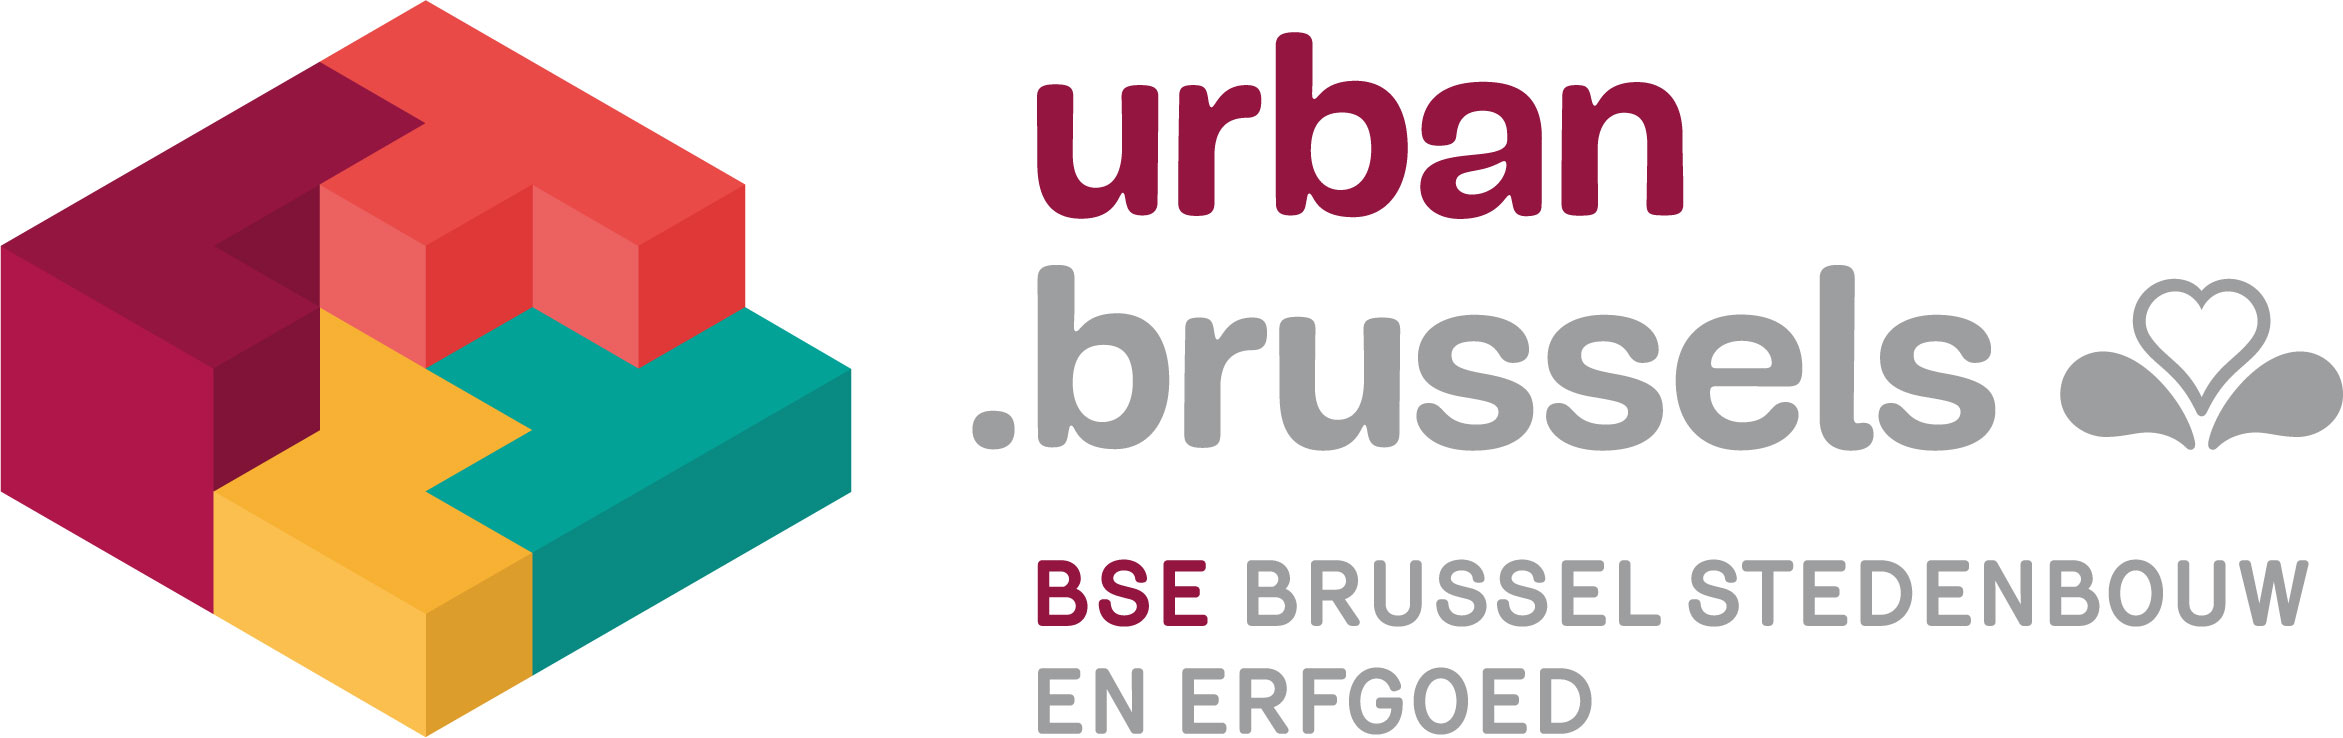 WELCOME URBAN.BRUSSELS!